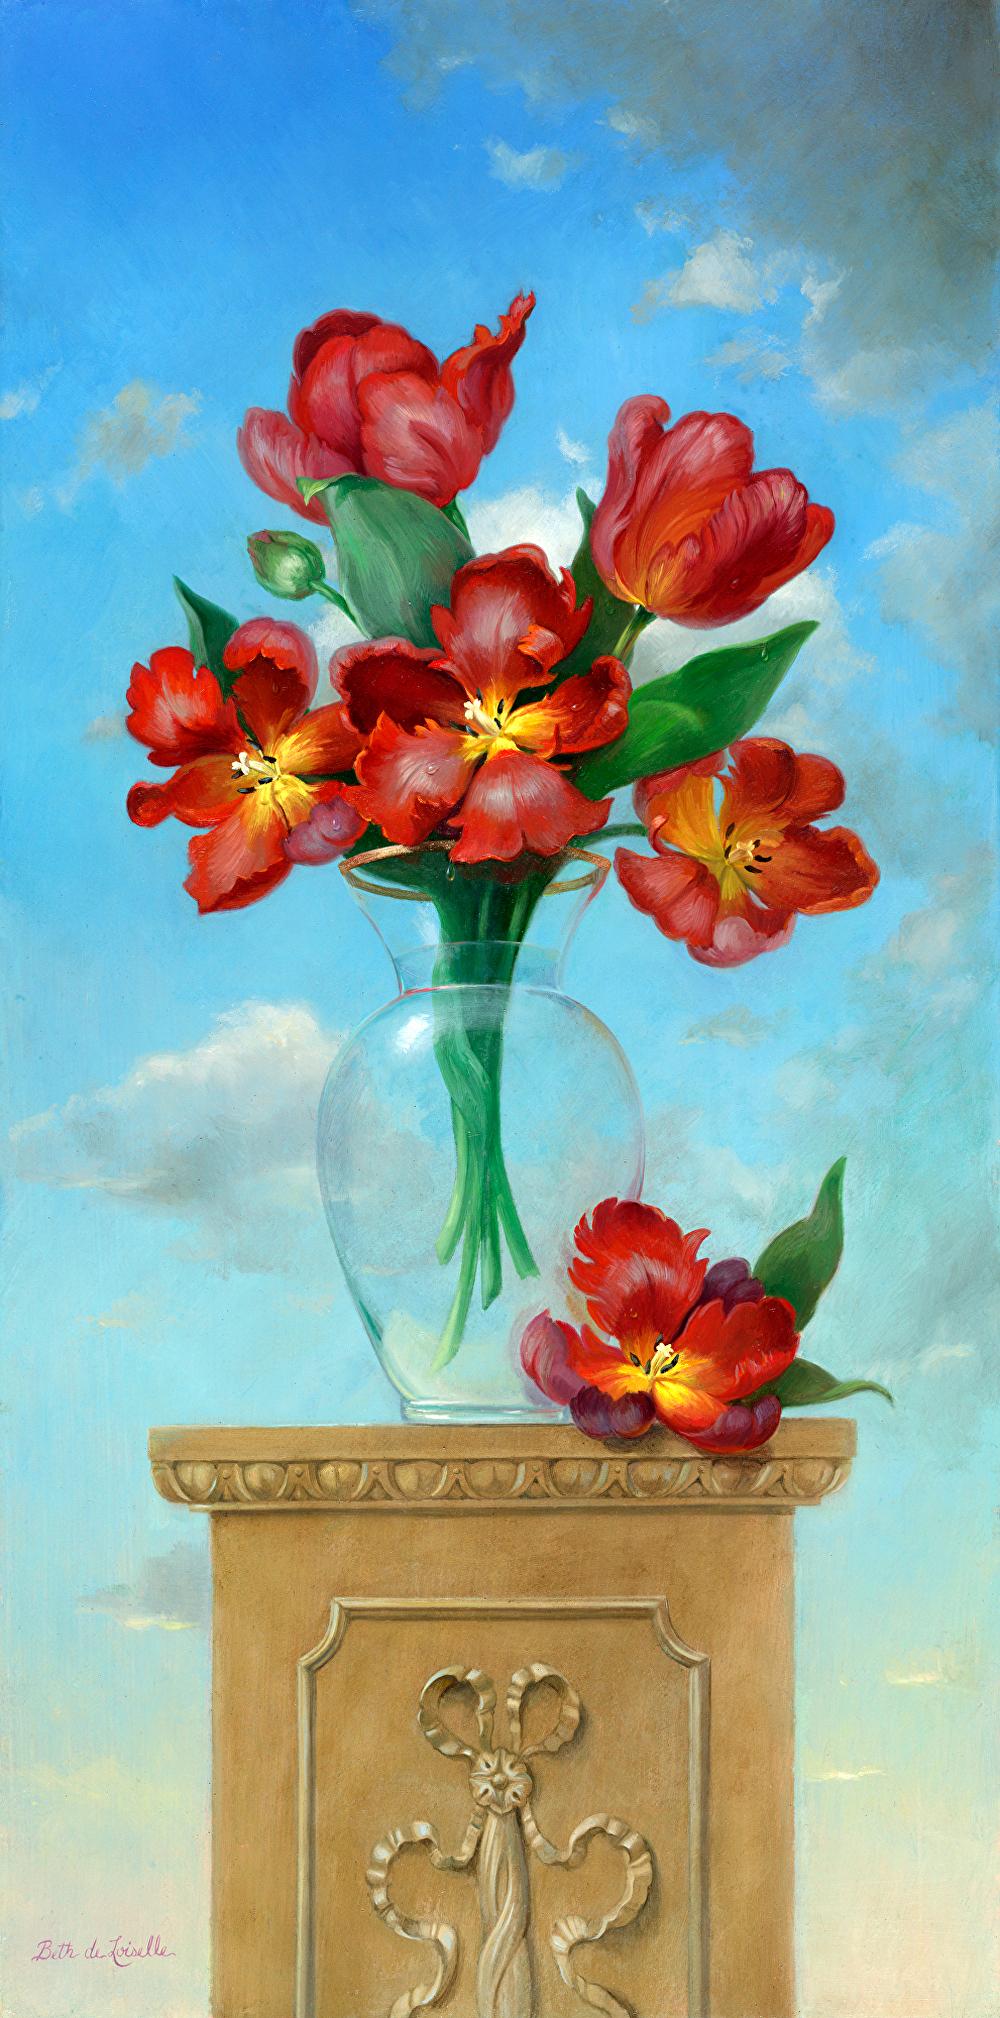 Beth de Loiselle Still-Life Painting - Vibrant Red Parrot Tulips Reach Up to The Sky in Dramatic Vertical Still-Life